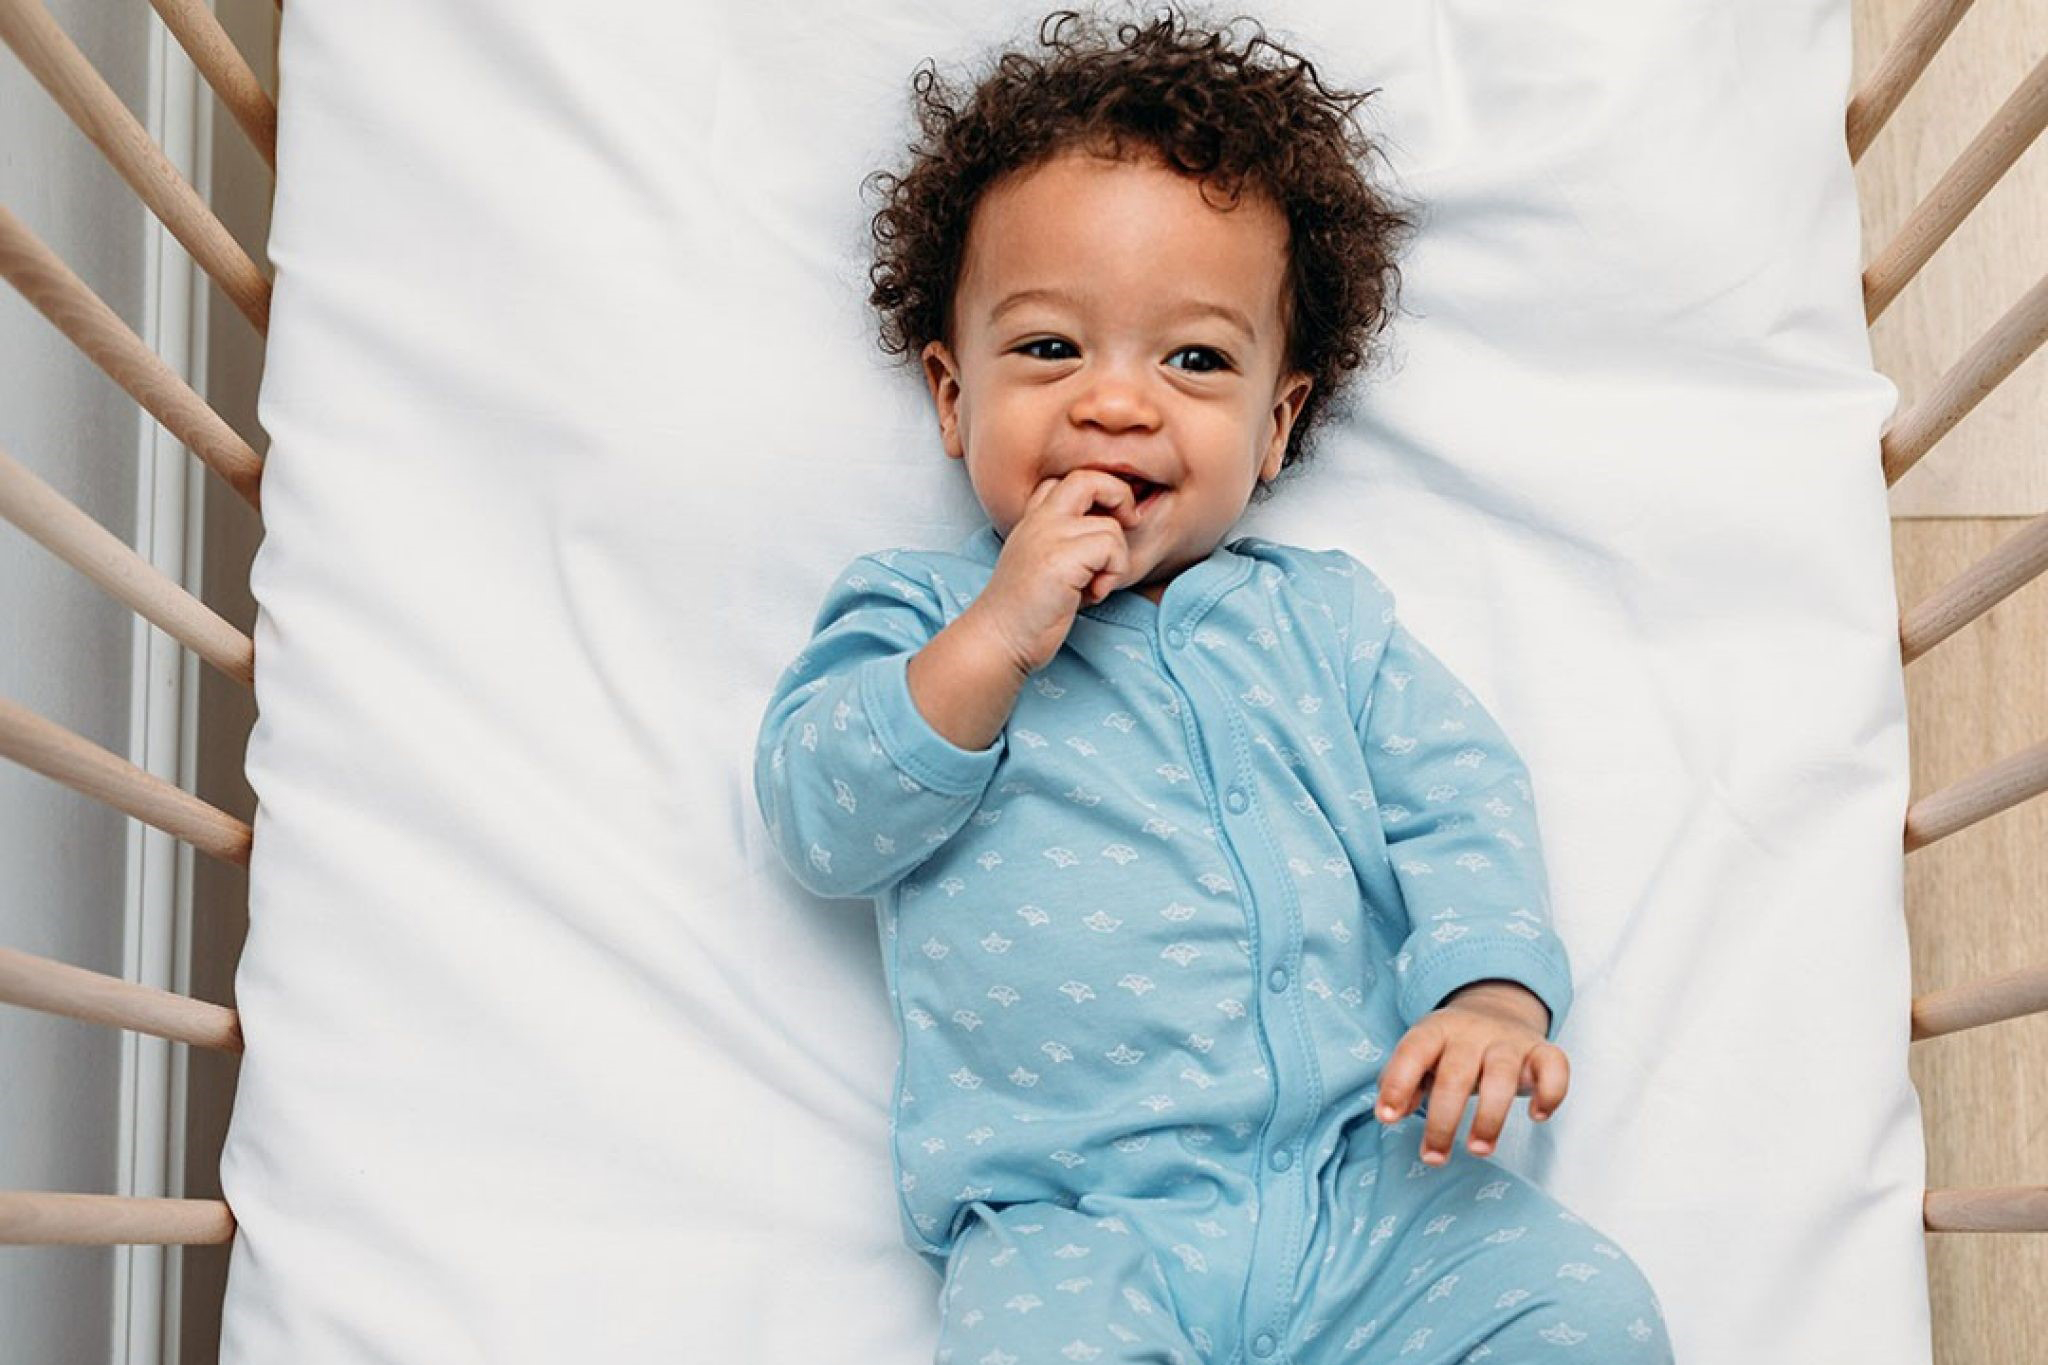 Overhead view of a happy baby boy lying in a crib wearing pajamas